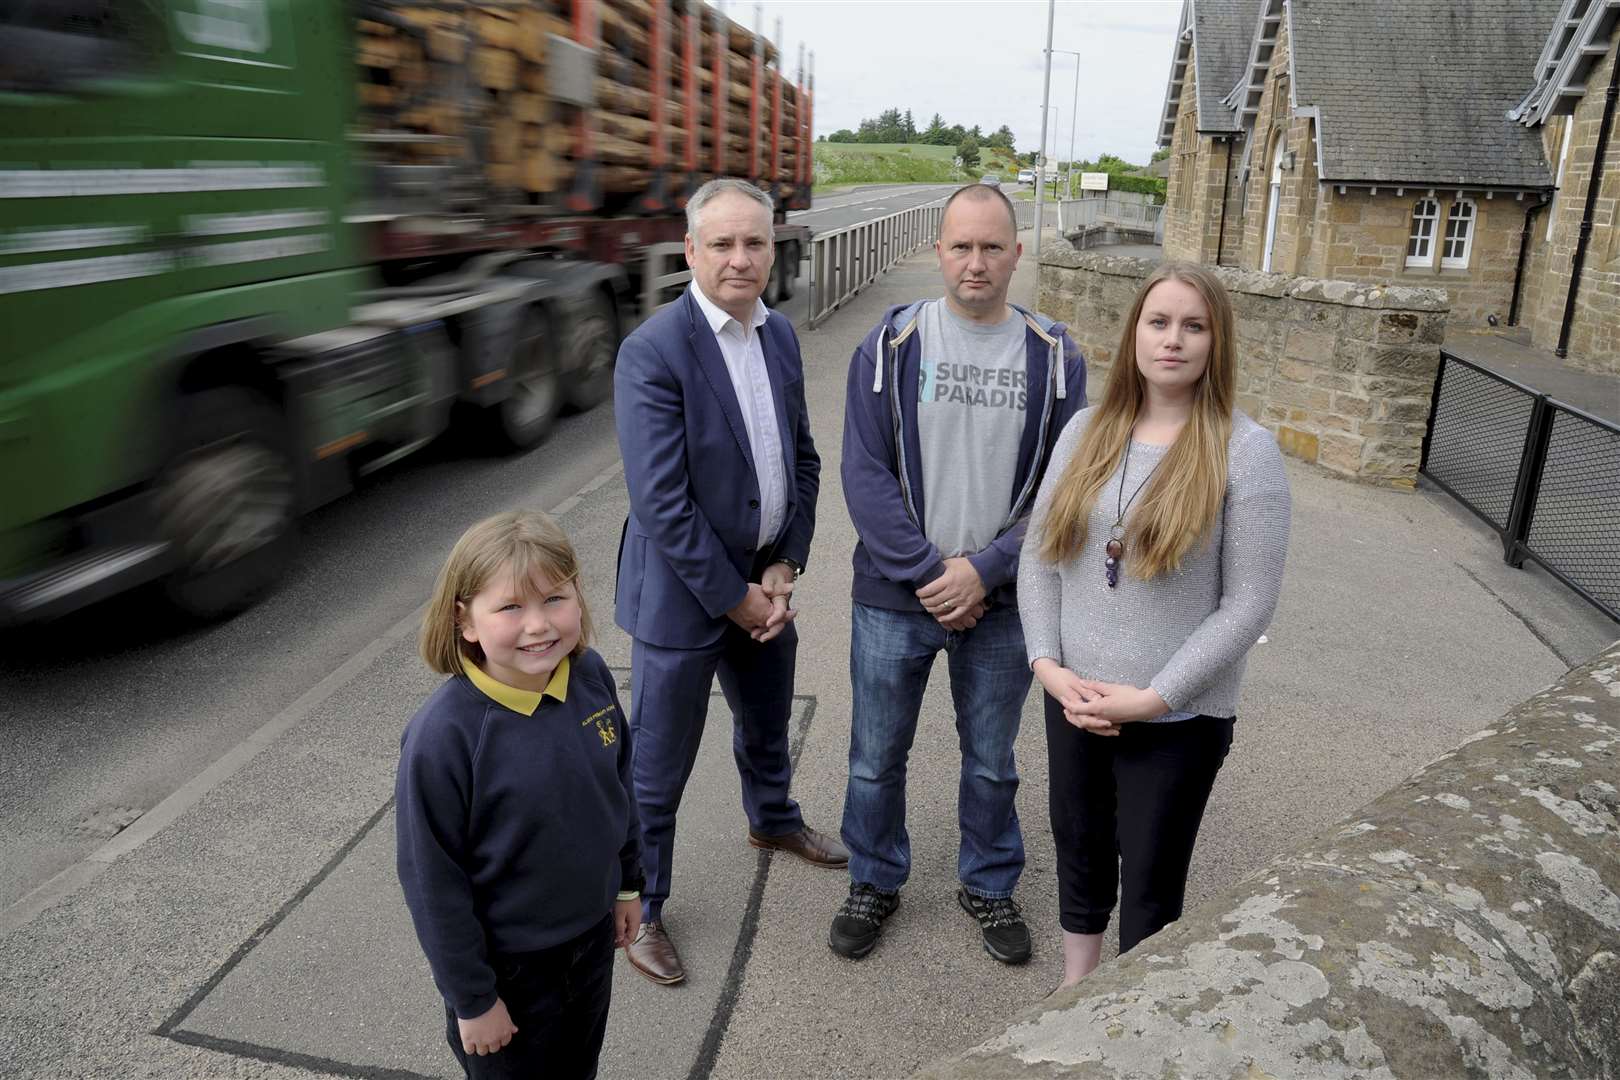 Pupil Chloe Taylor, MSP Richard Lochhead, father Alan Taylor and councillor Amy Patience campaigning for a reduced speed limit in September 2020. Picture: Daniel Forsyth. Image No.037870.